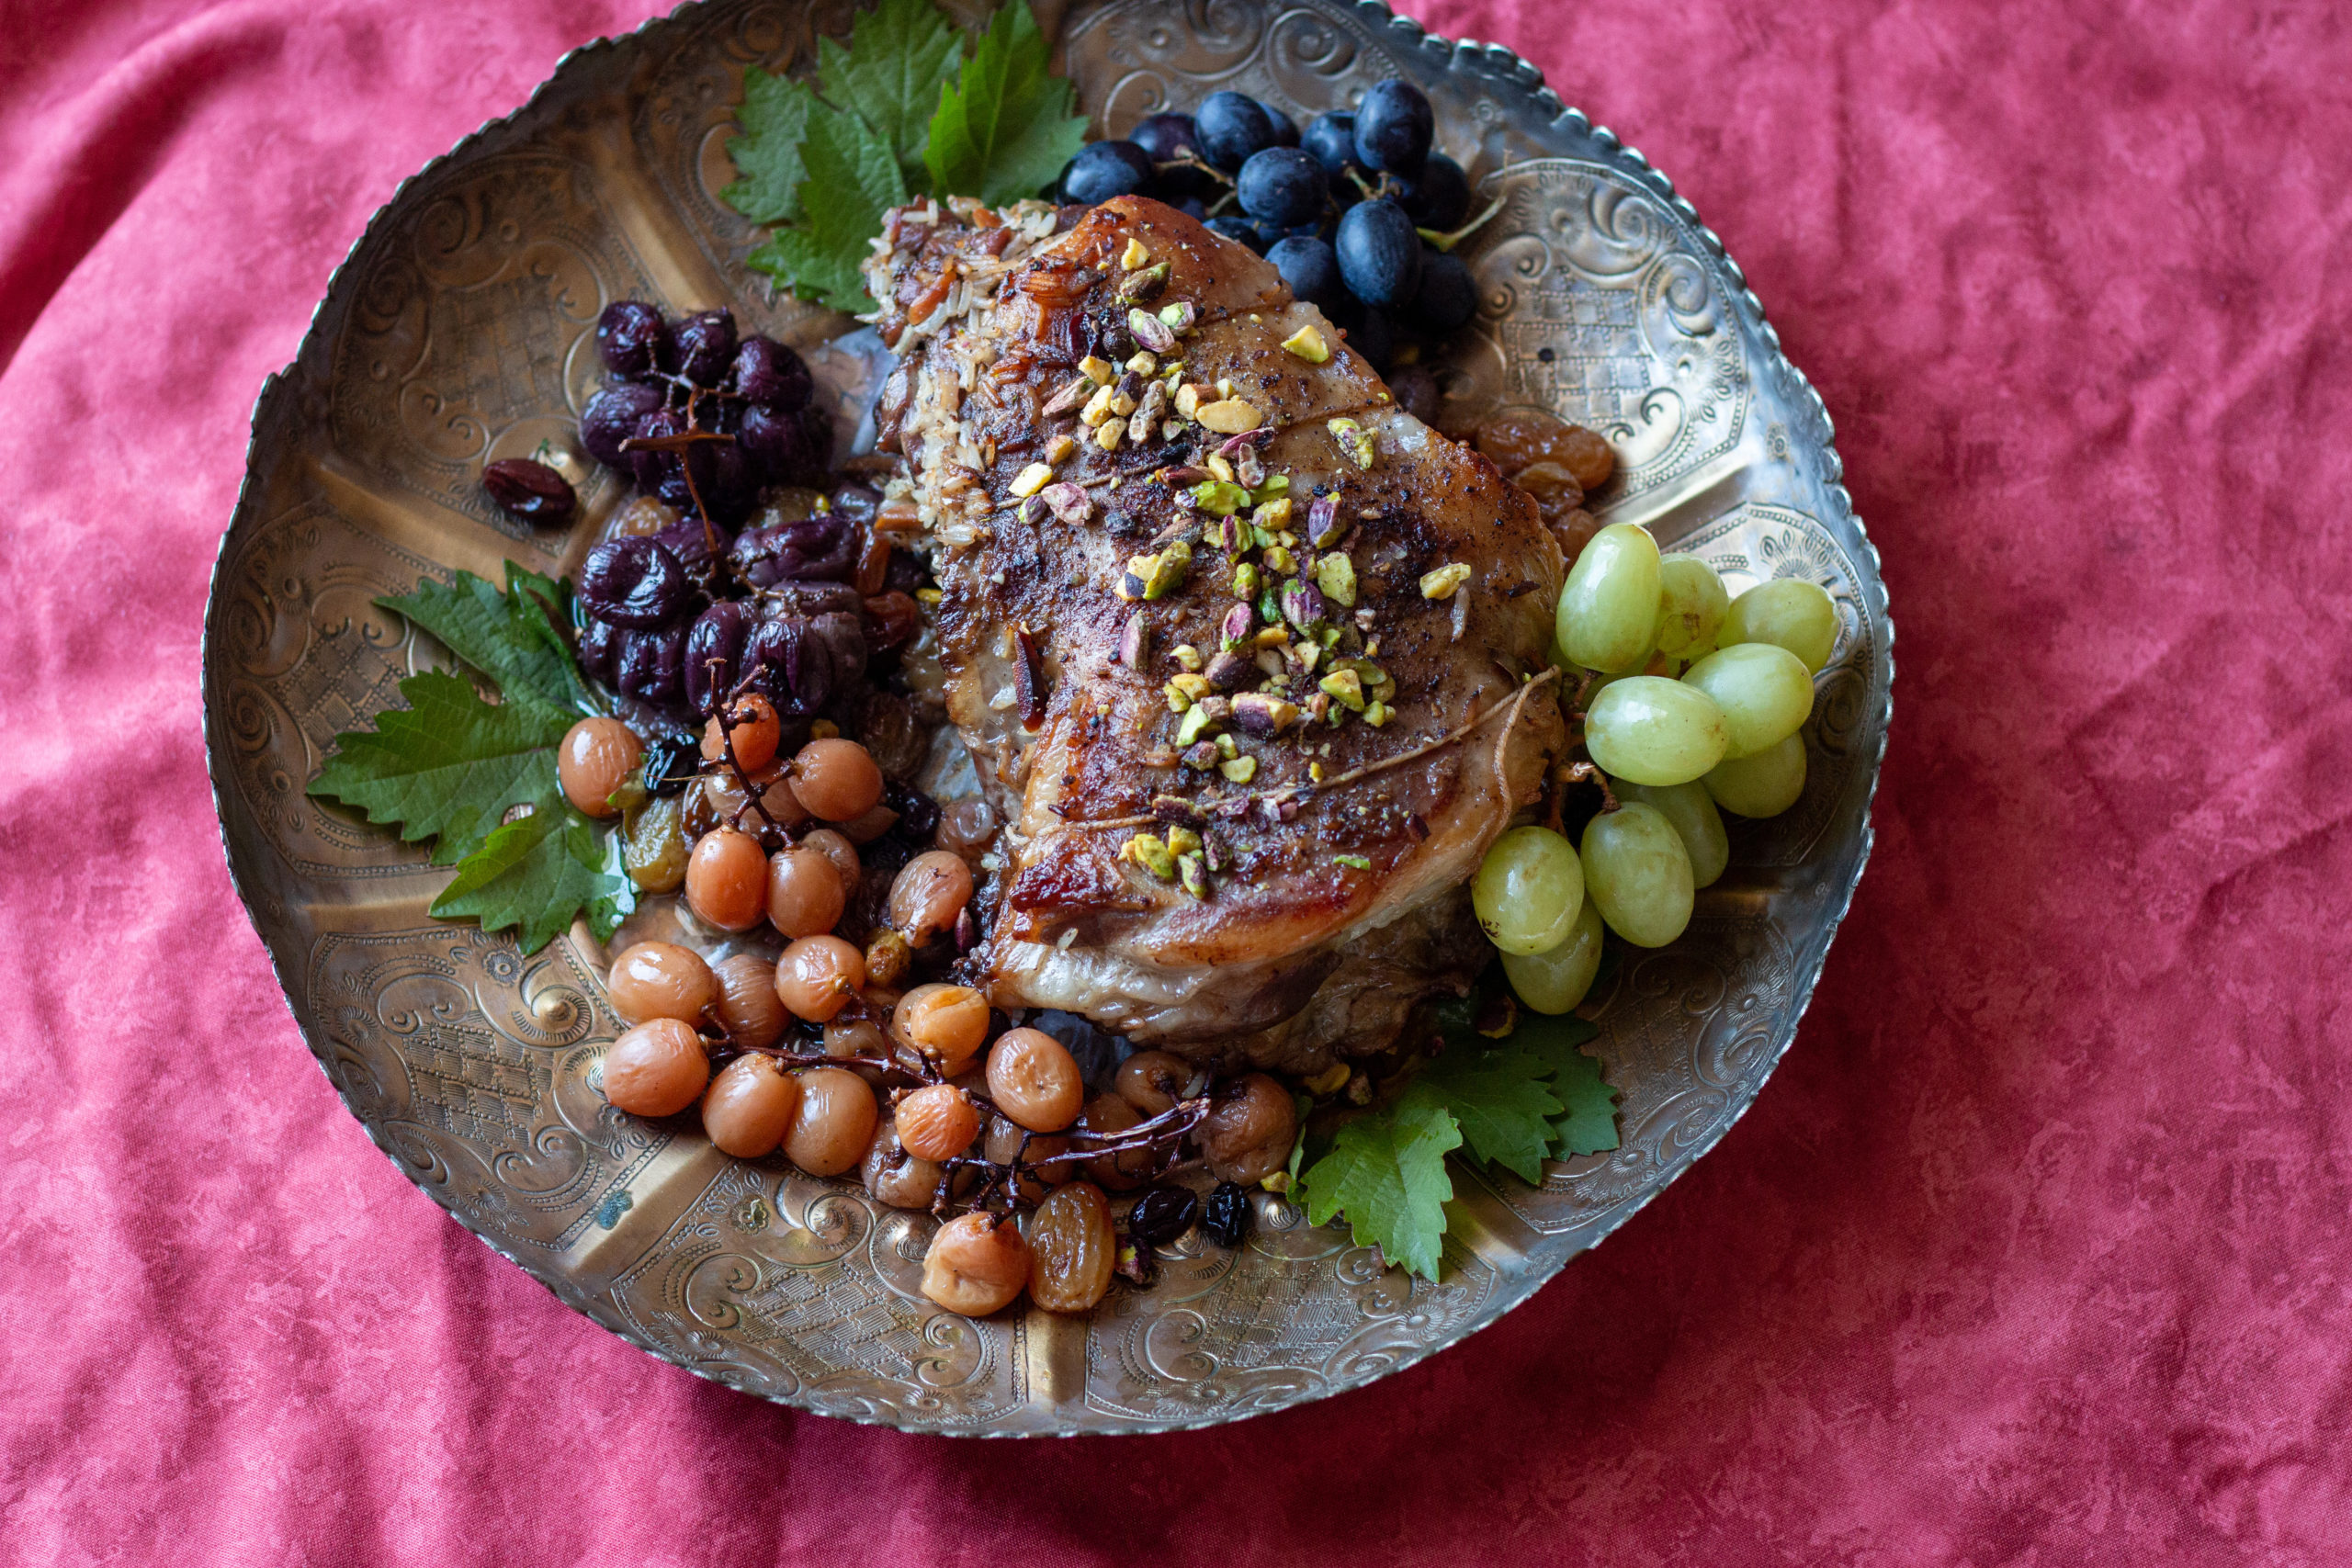 Lamb’s neck stuffed with raisins and grapes on a brass plate